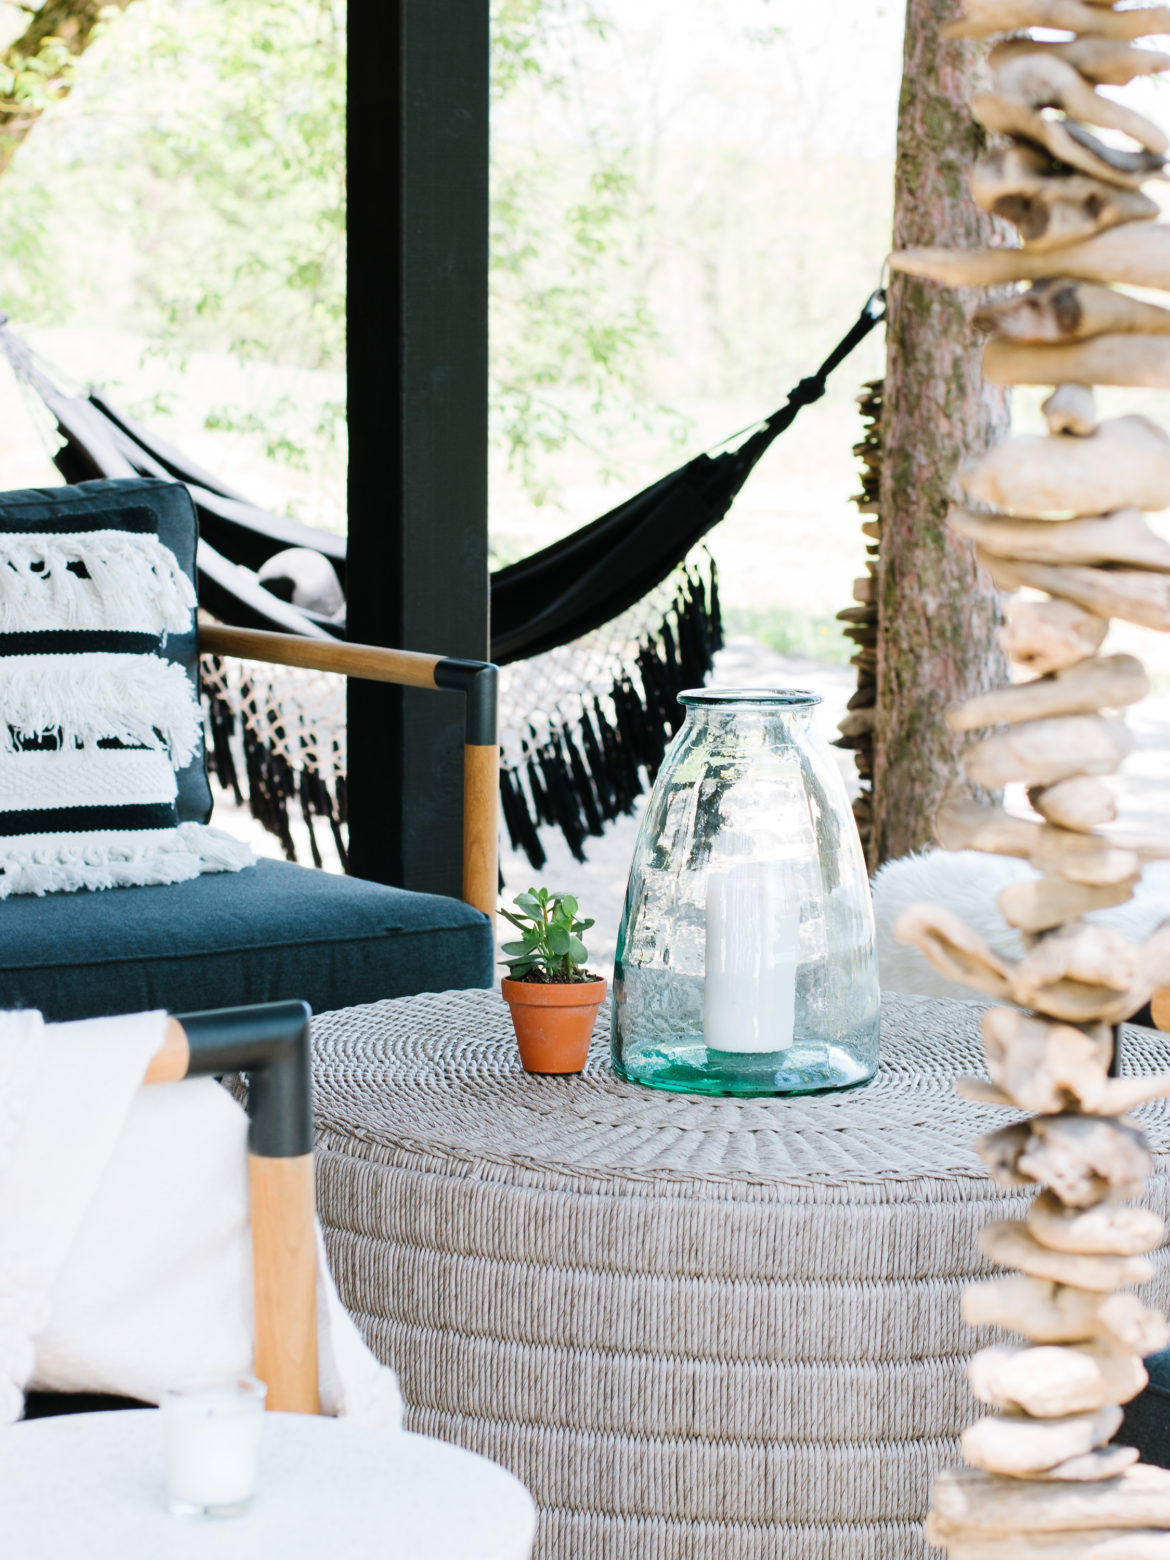 Let’s talk about outdoor living, style and all the things! Get ready for the easiest outdoor design tips of all time. | www.lynneknowlton.com